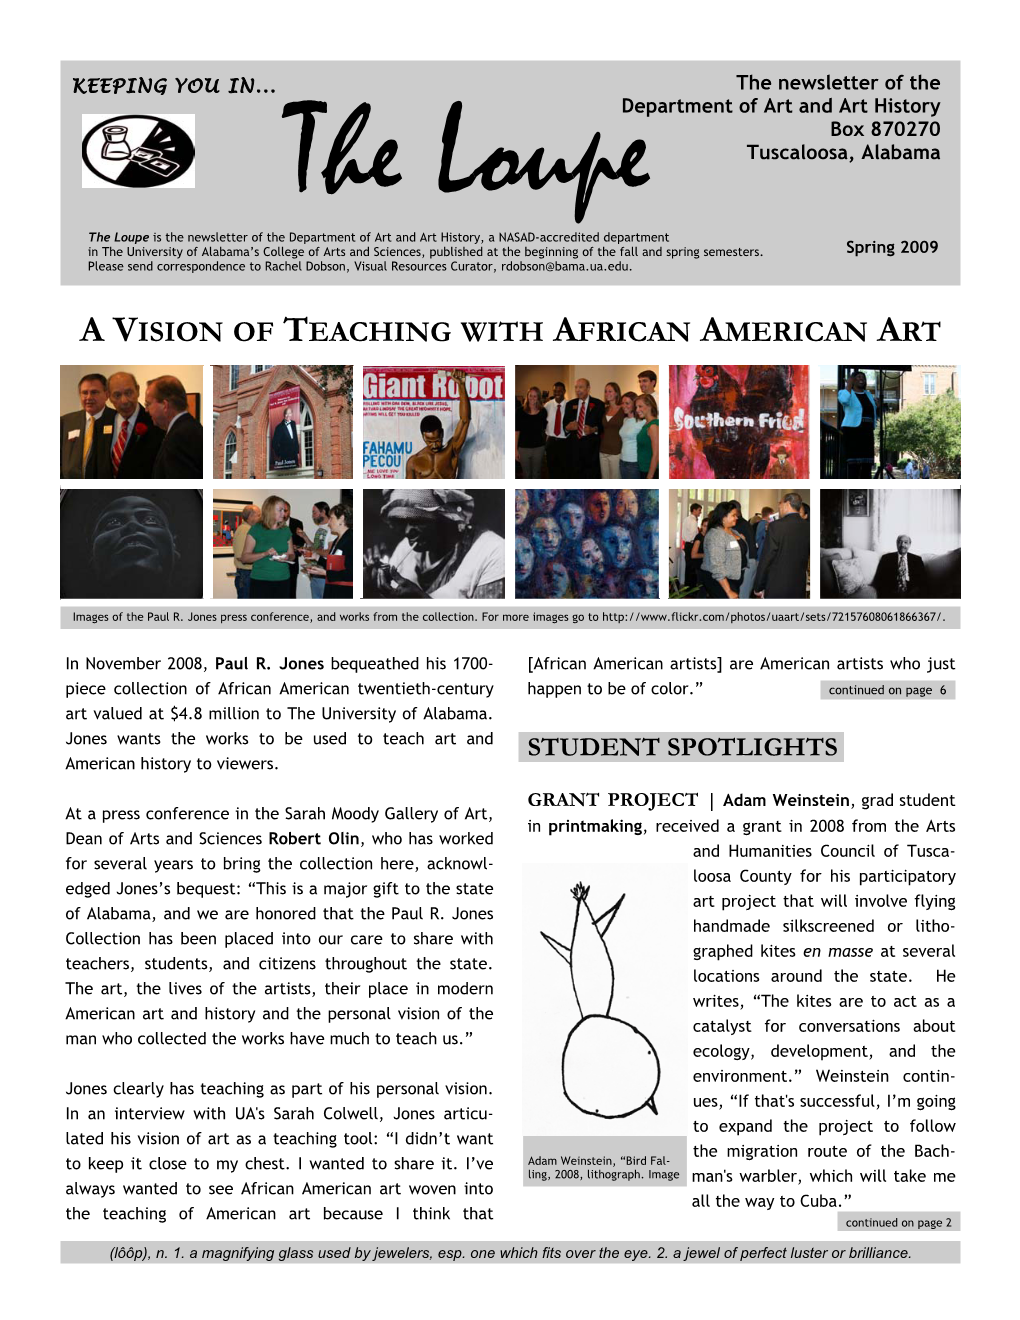 A Vision of Teaching with African American Art